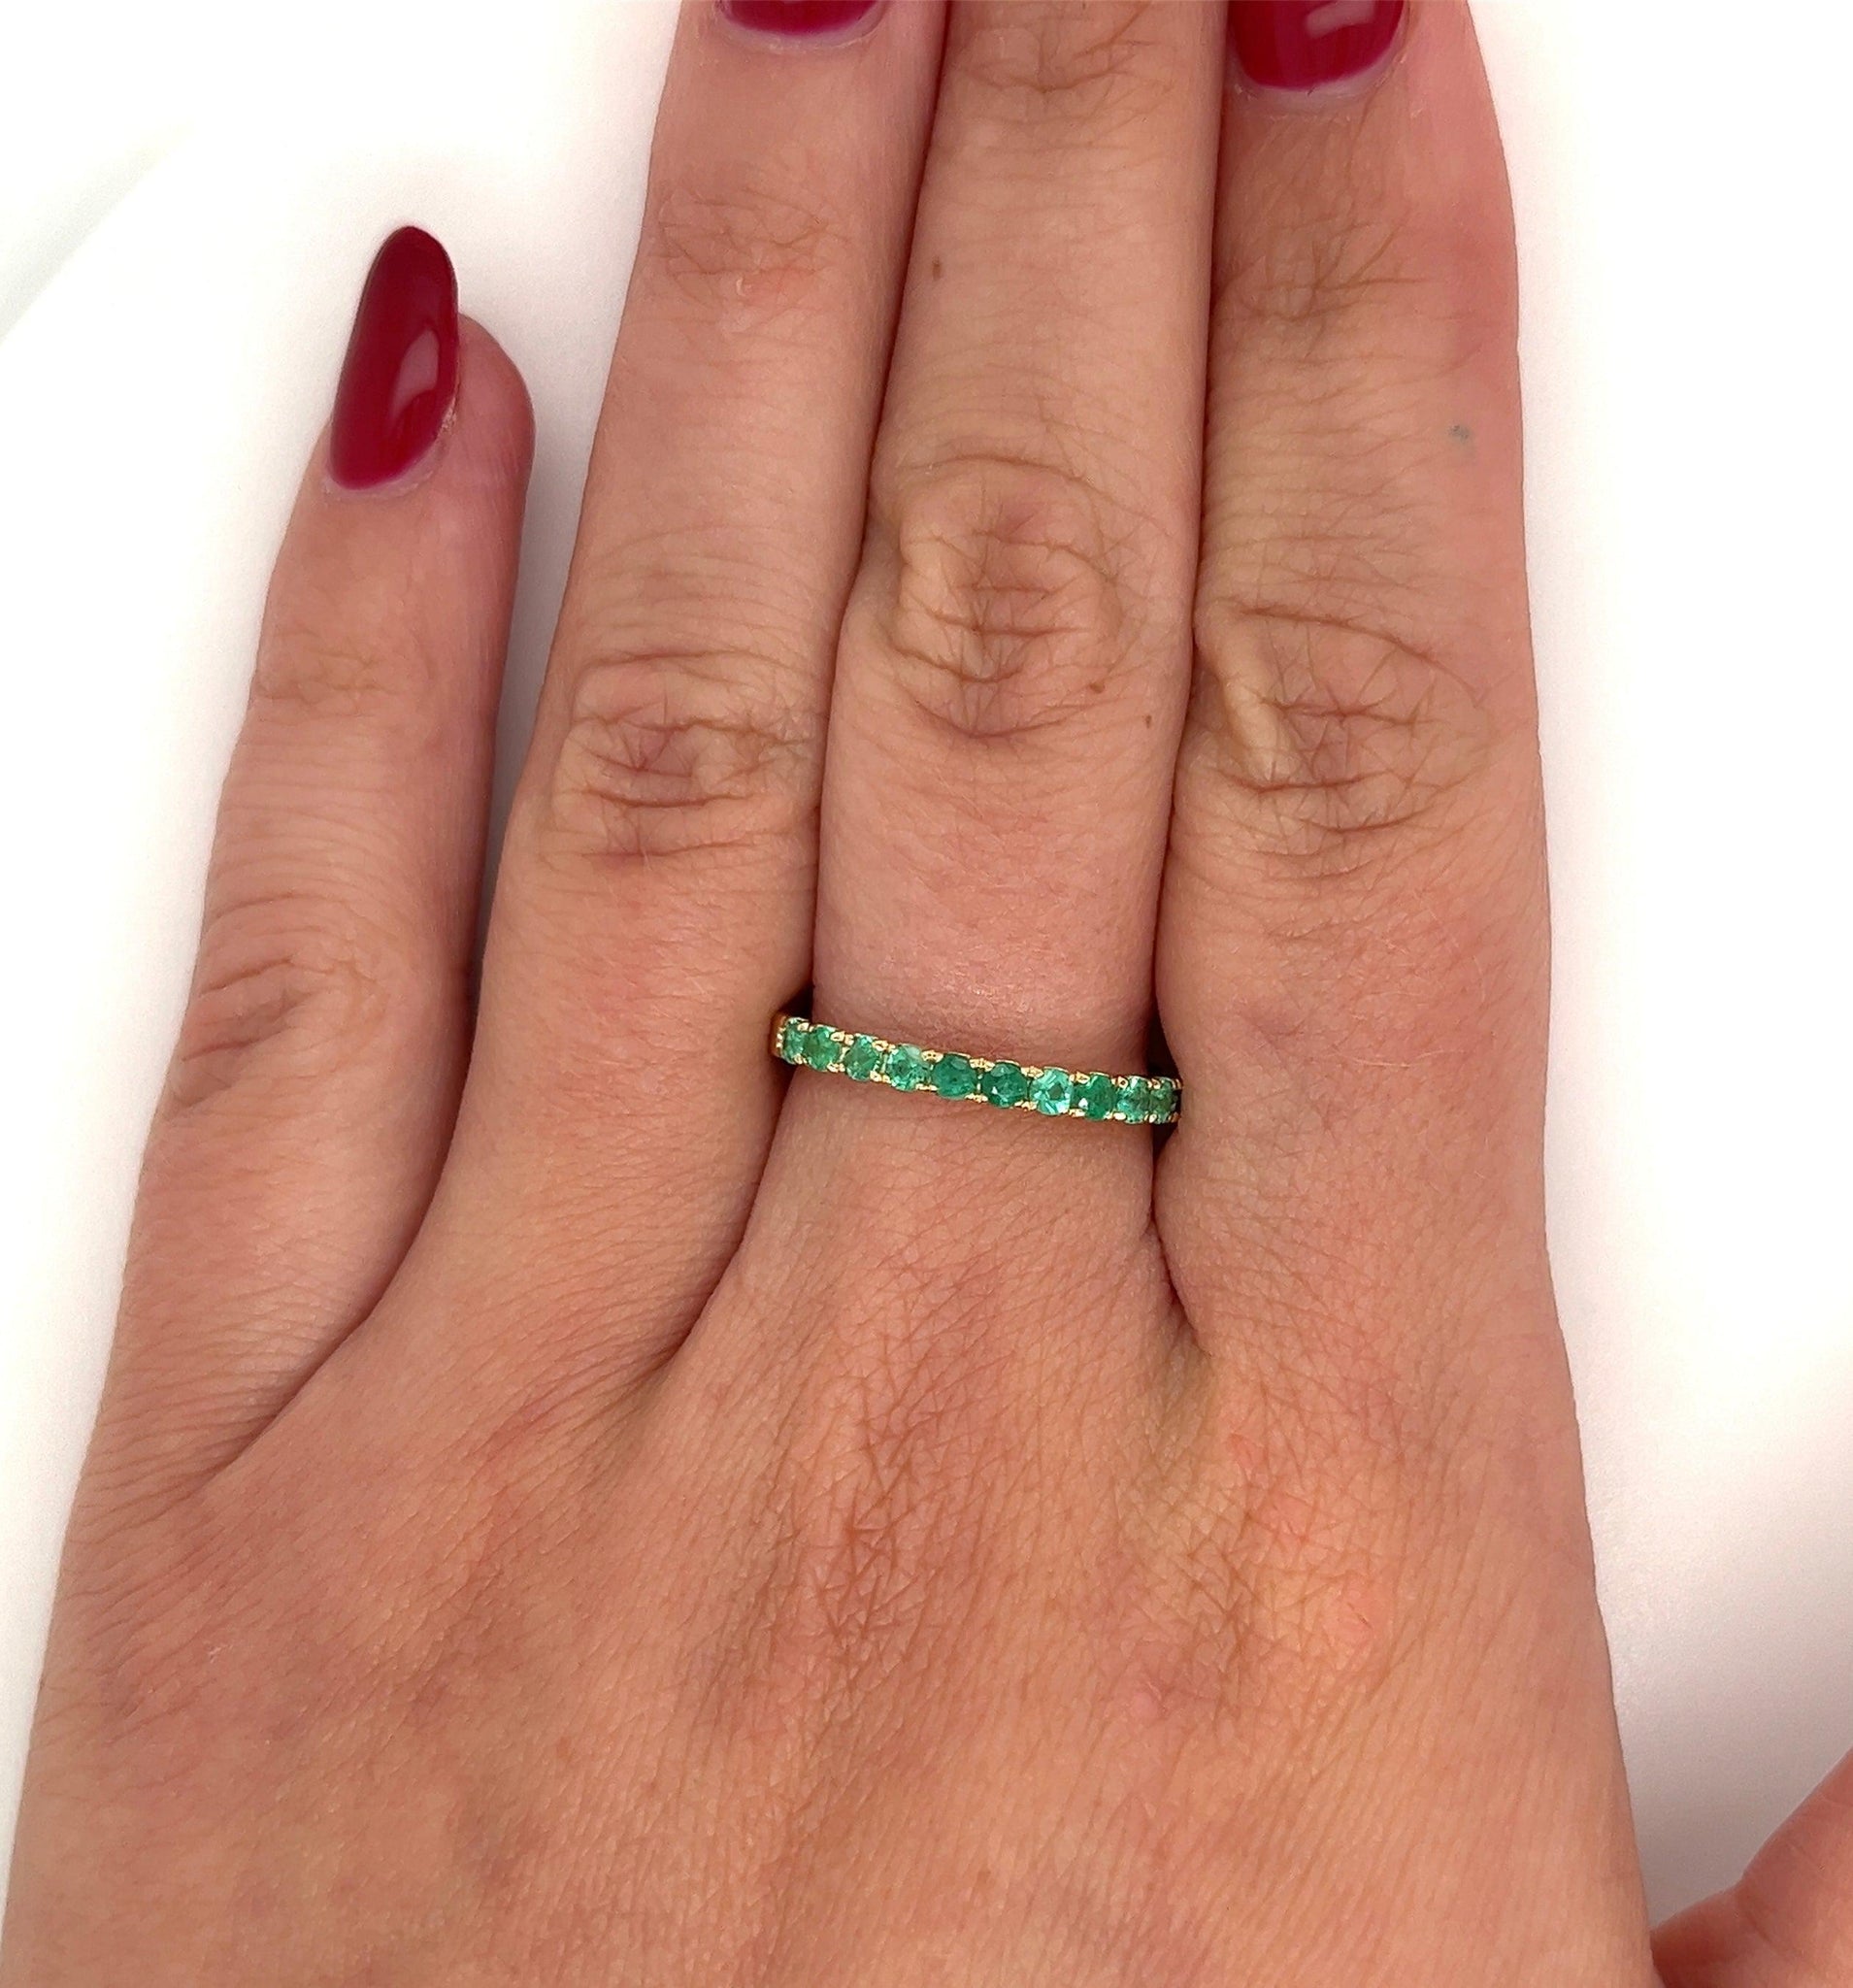 18k Solid Gold Natural Round Emerald Band | Size 6.5-7.5 | 2.0-2.5mm-Emerald Ring-ASSAY